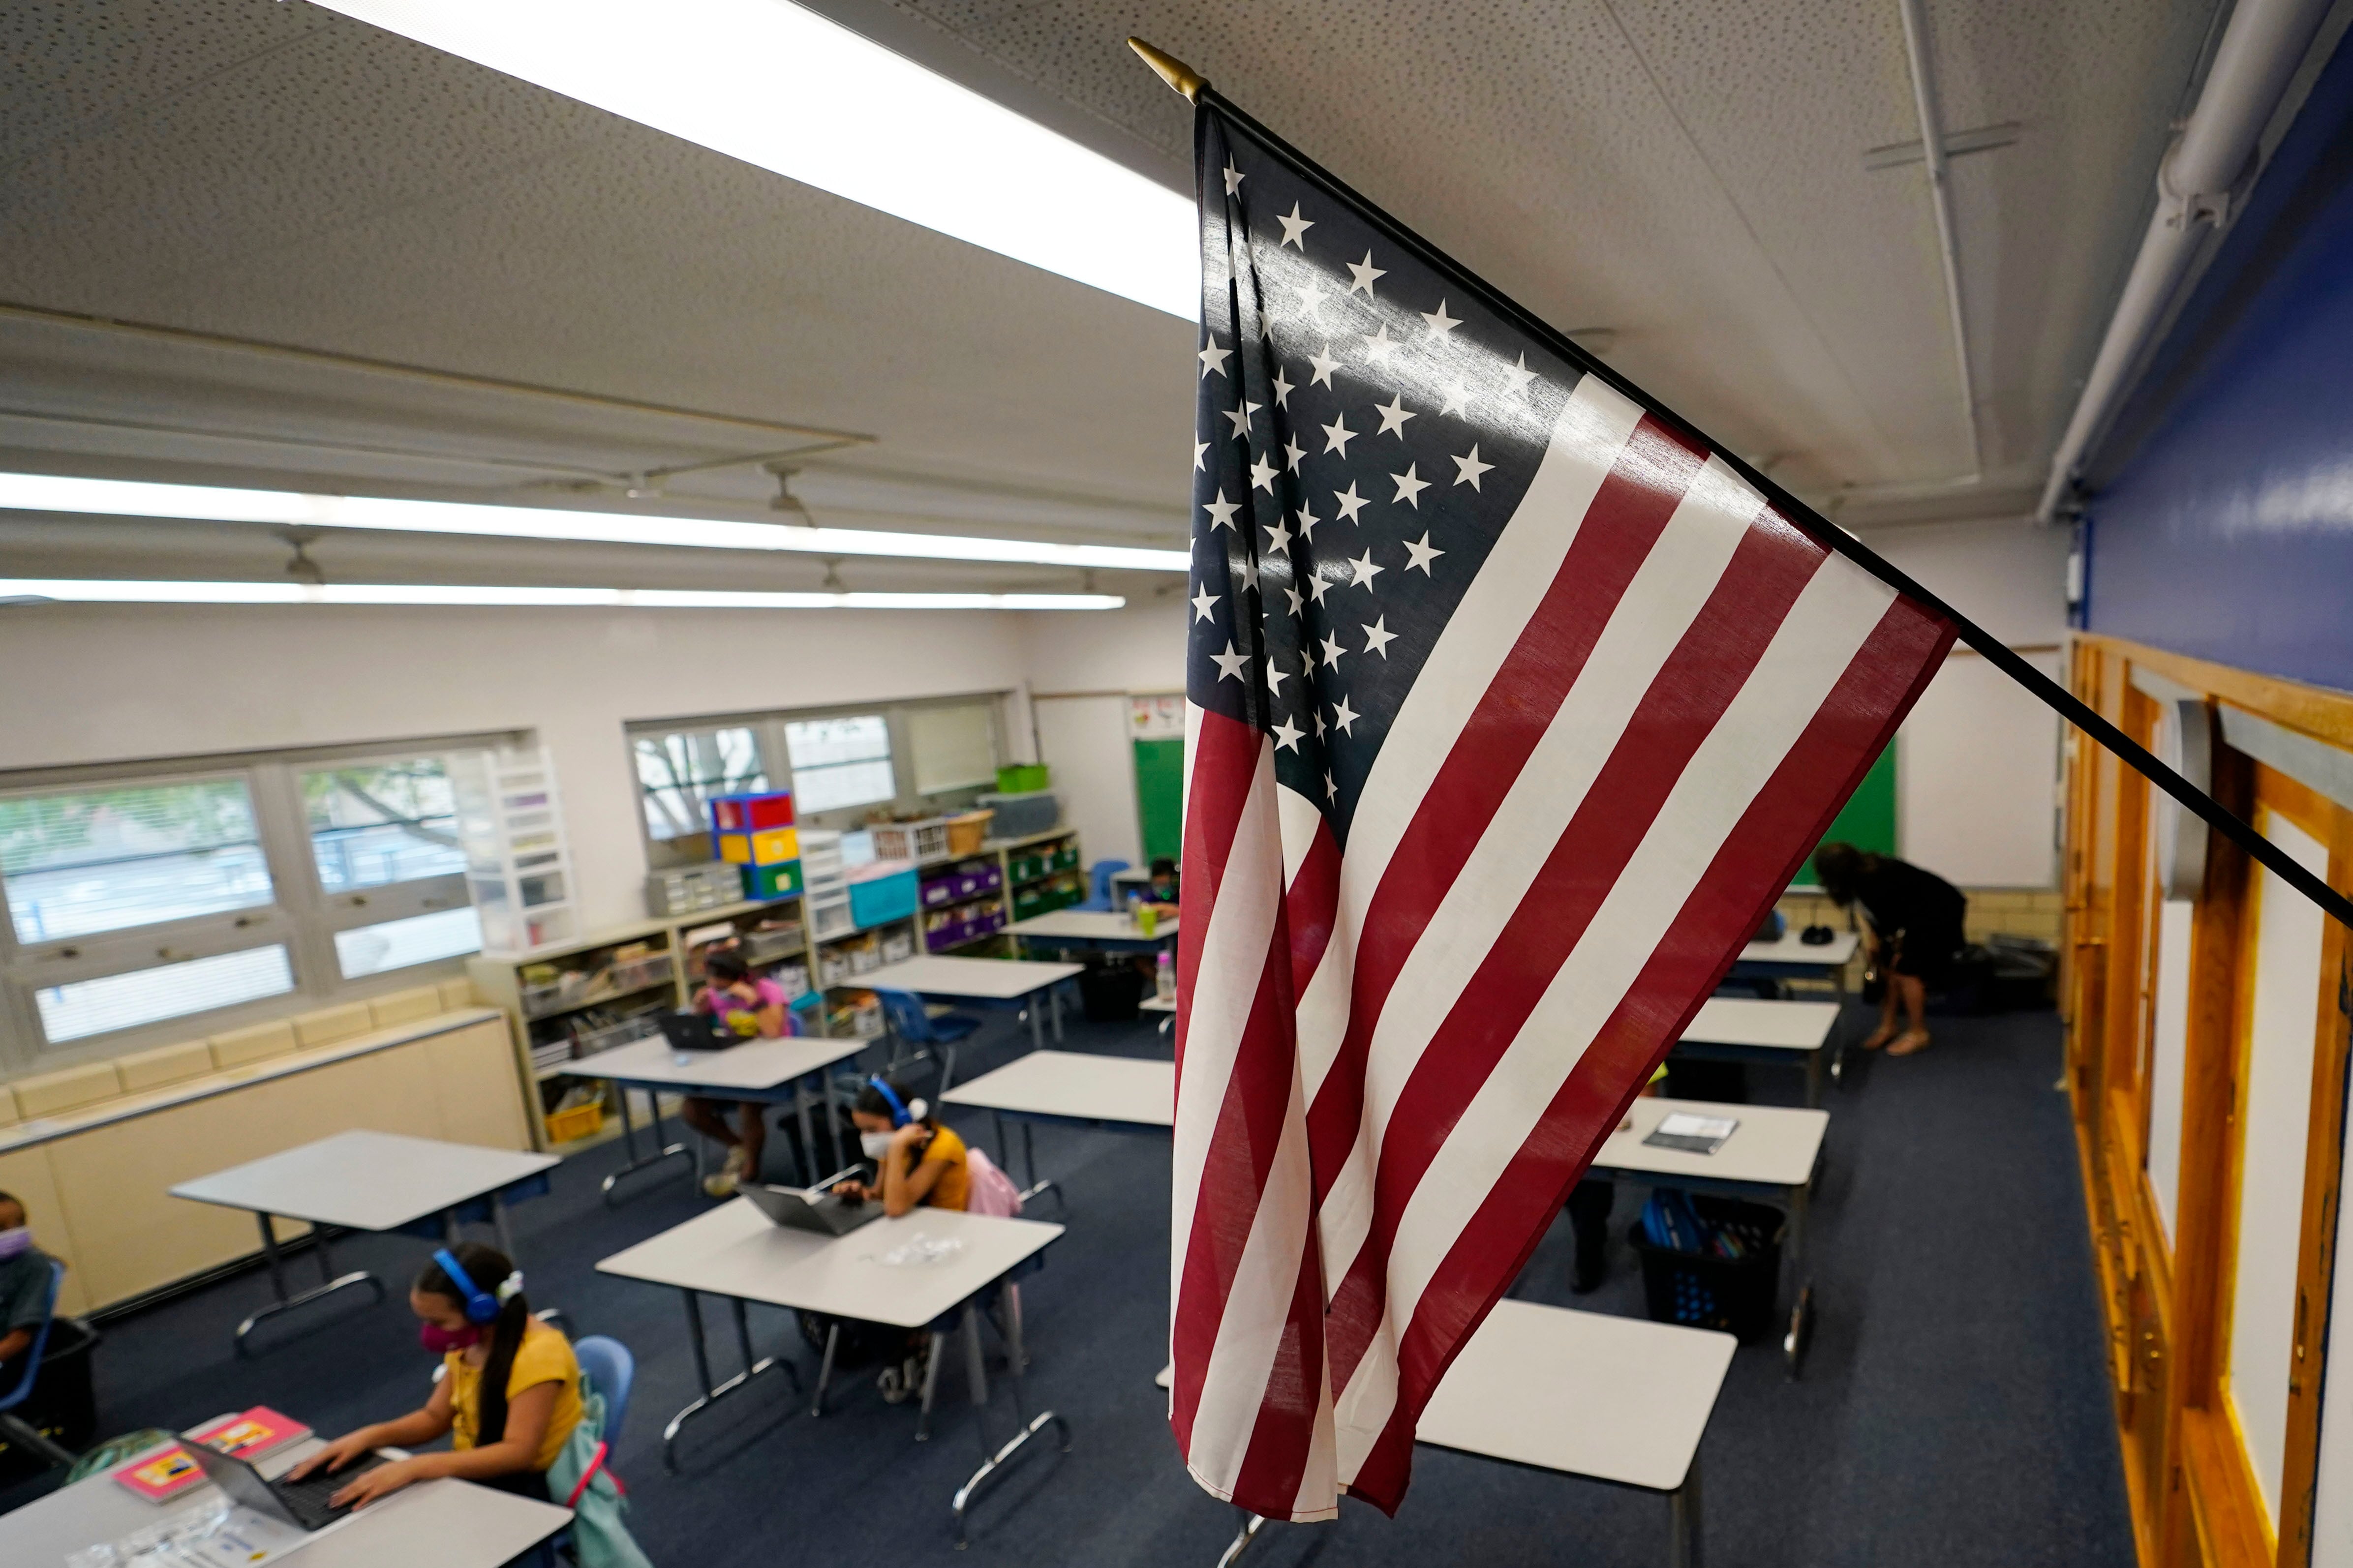 An American flag hangs over a classroom full of masked students working at desks.